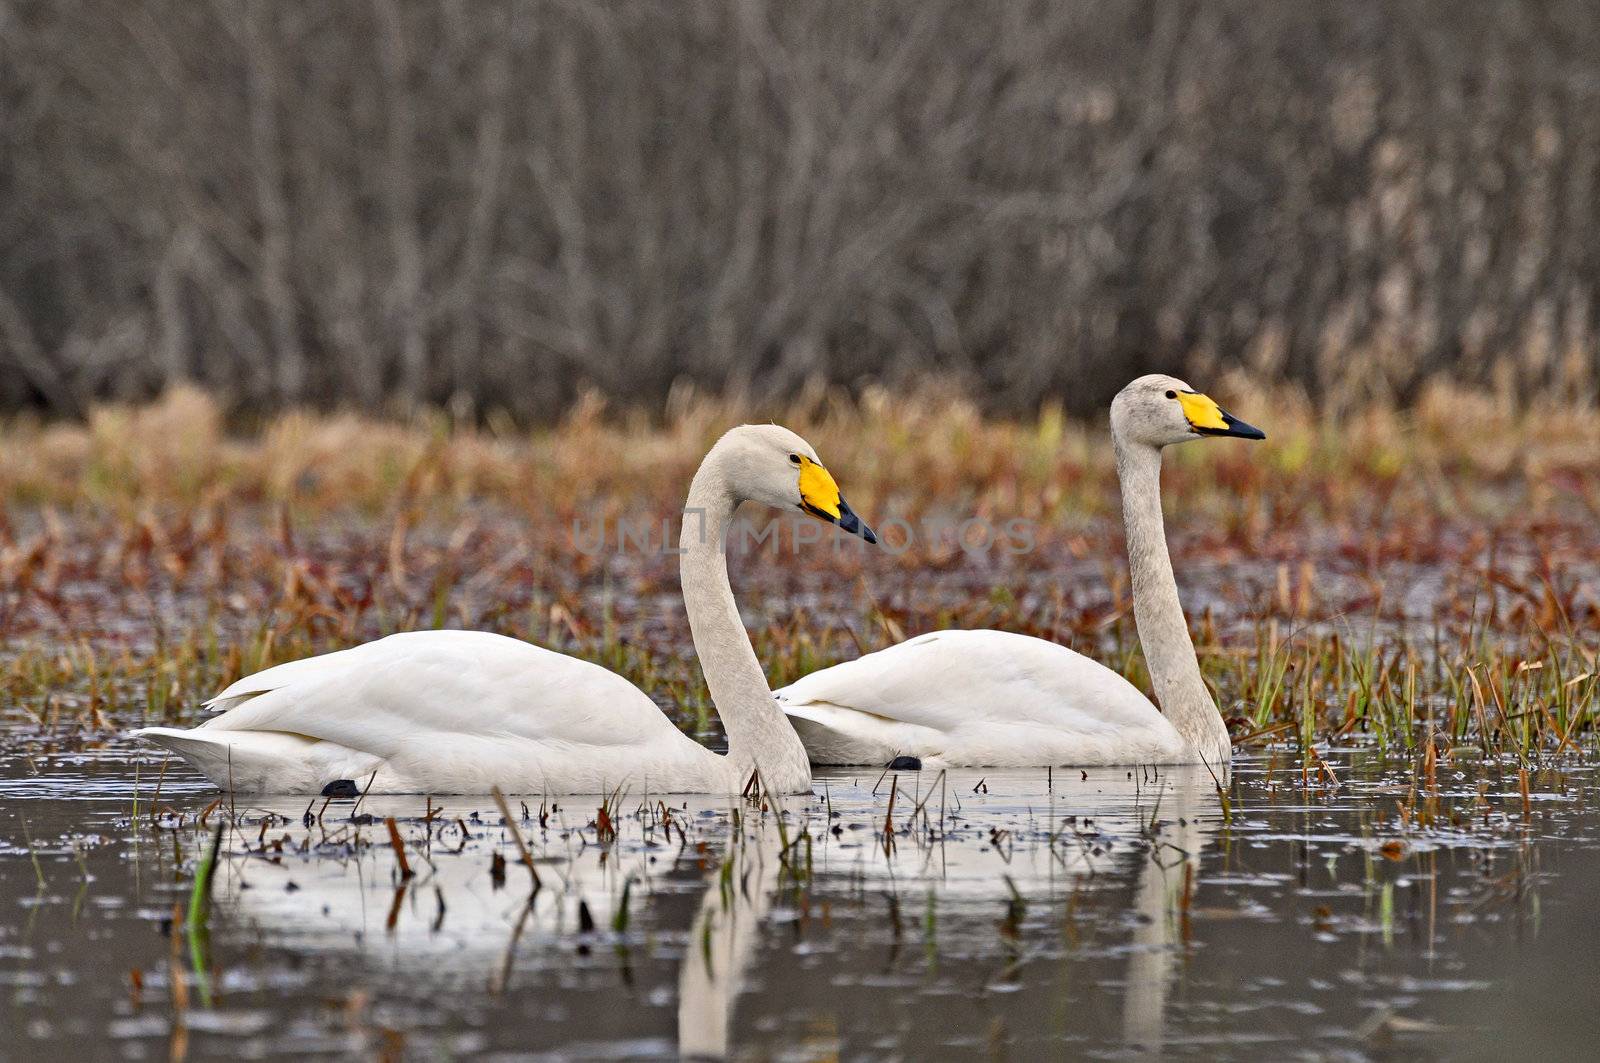 A couple of whooping swans swimming in a shallow pond during the spring.